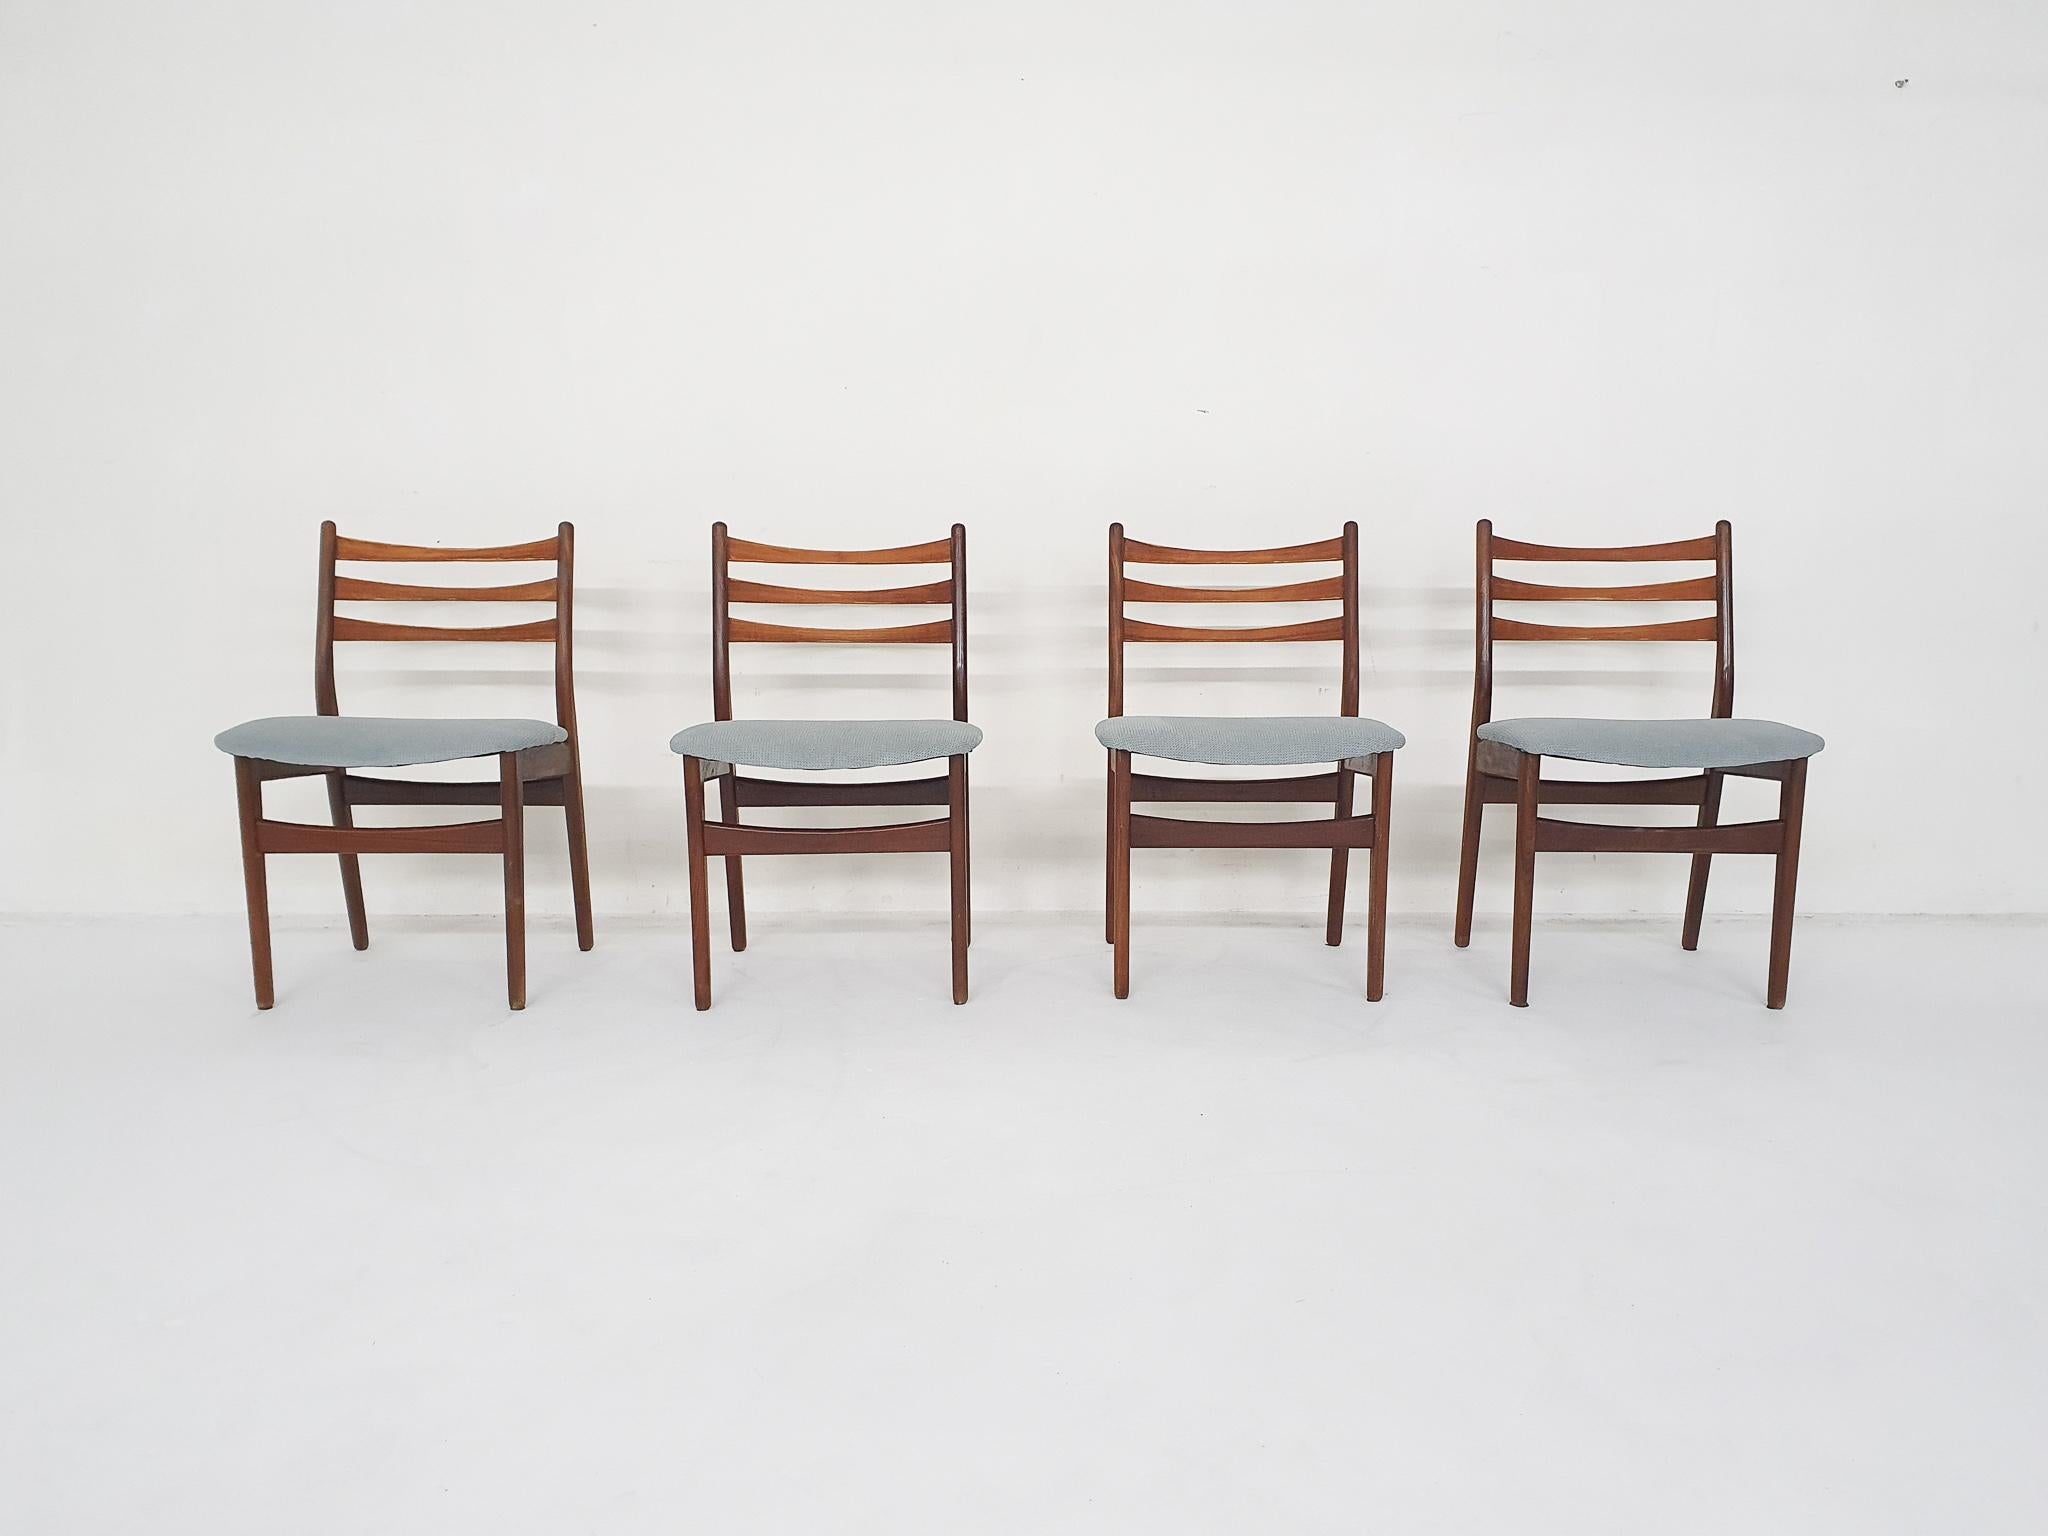 Teak dining chairs with light blue upholstery.

Wood has been refinshed and joints have been checked and glued
